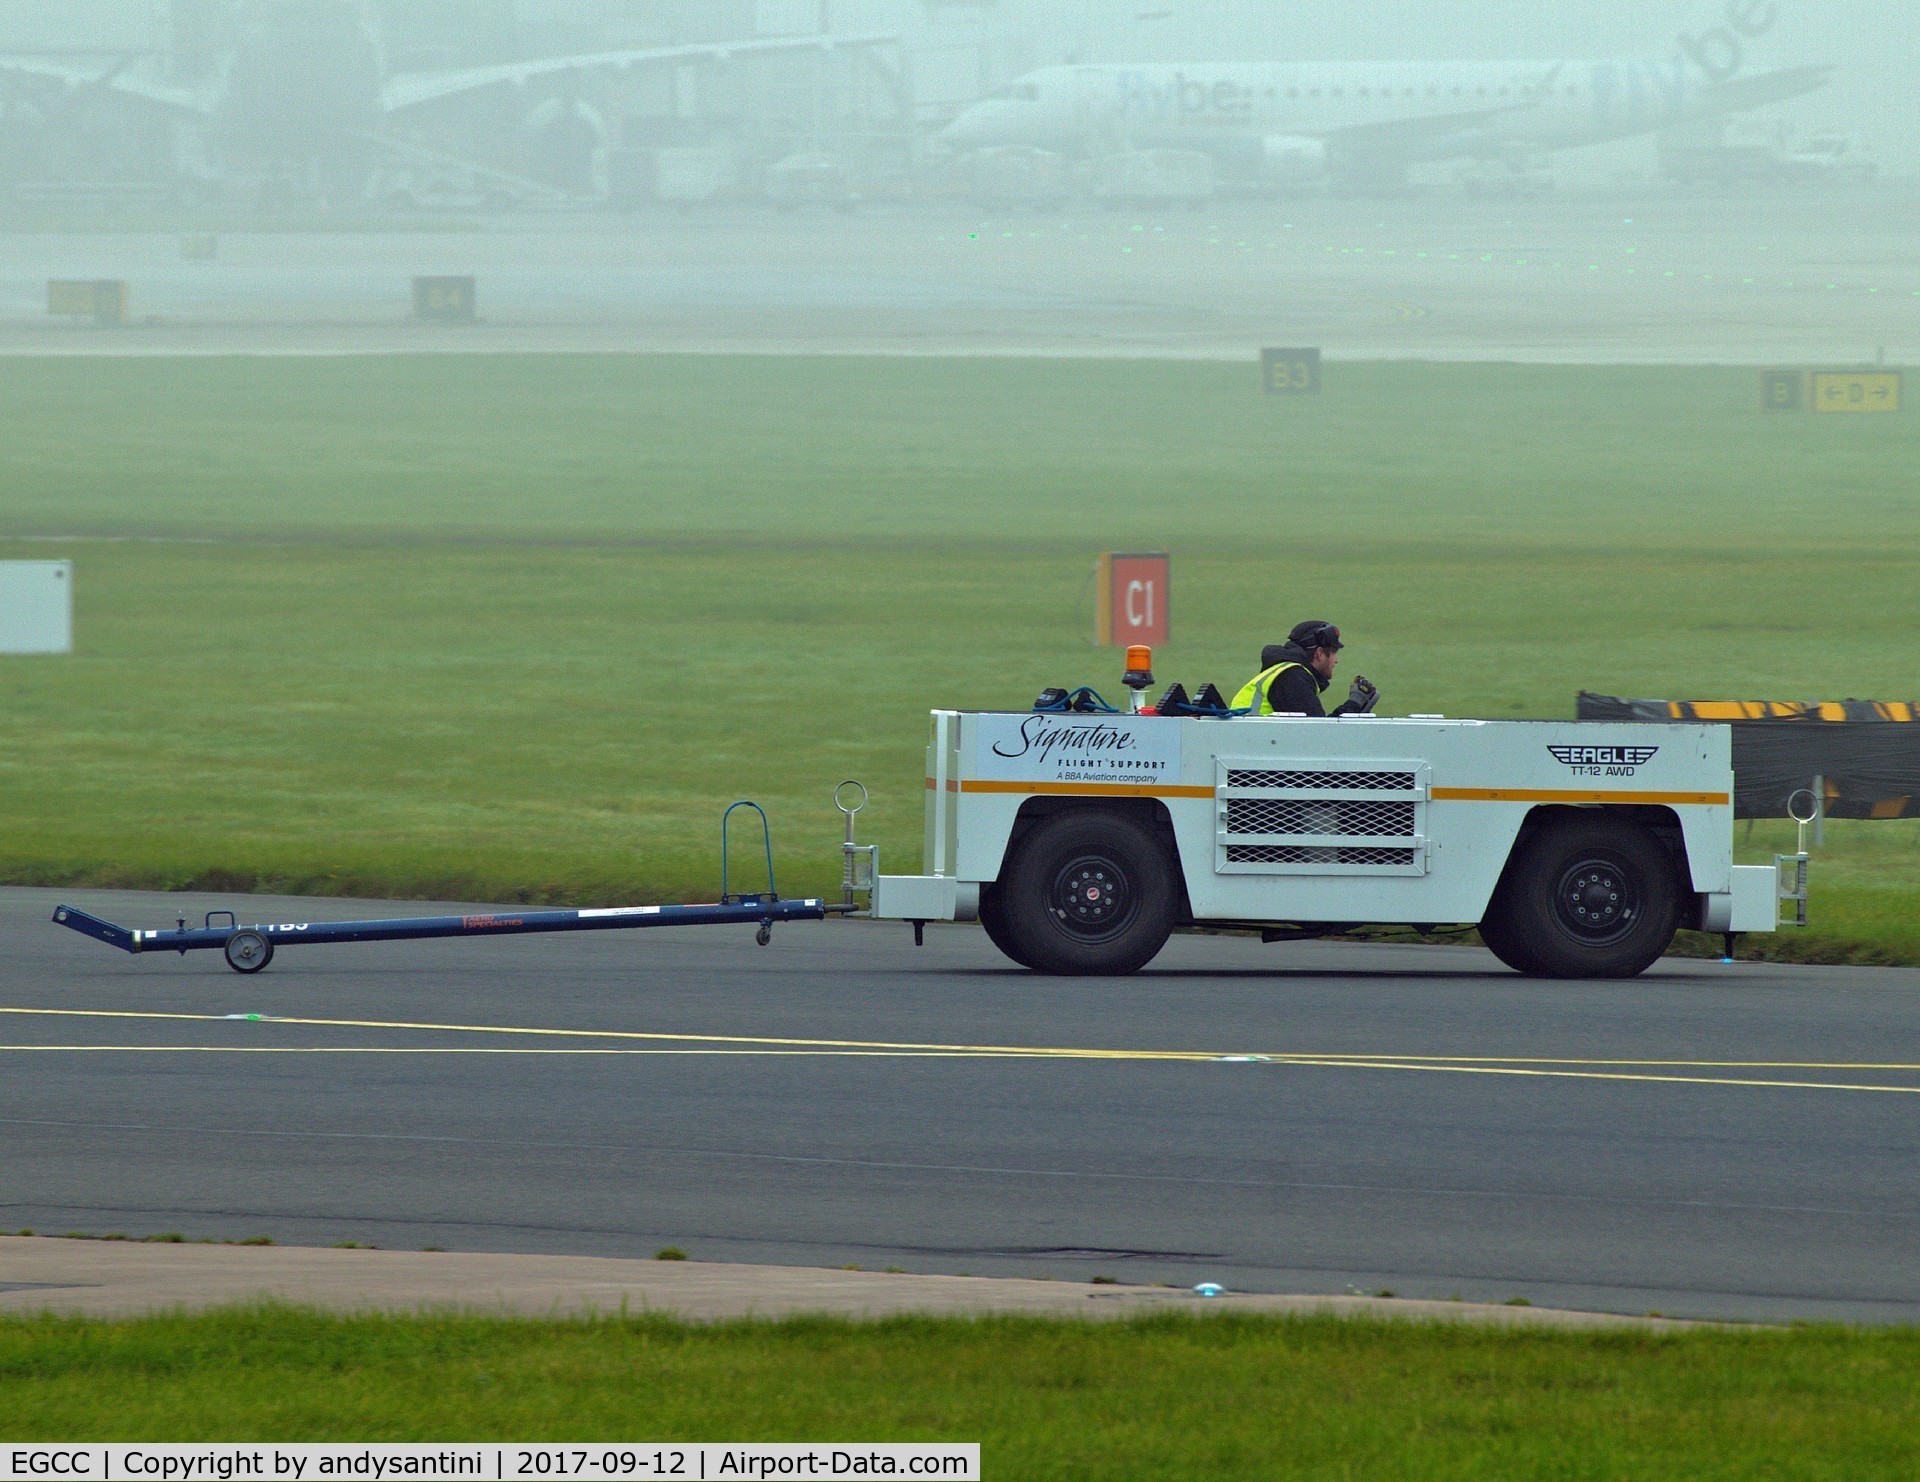 Manchester Airport, Manchester, England United Kingdom (EGCC) - FBO tug going to get [D-BUZZ CE750] and tow it over to the [FBO exc ramp] at egcc uk.